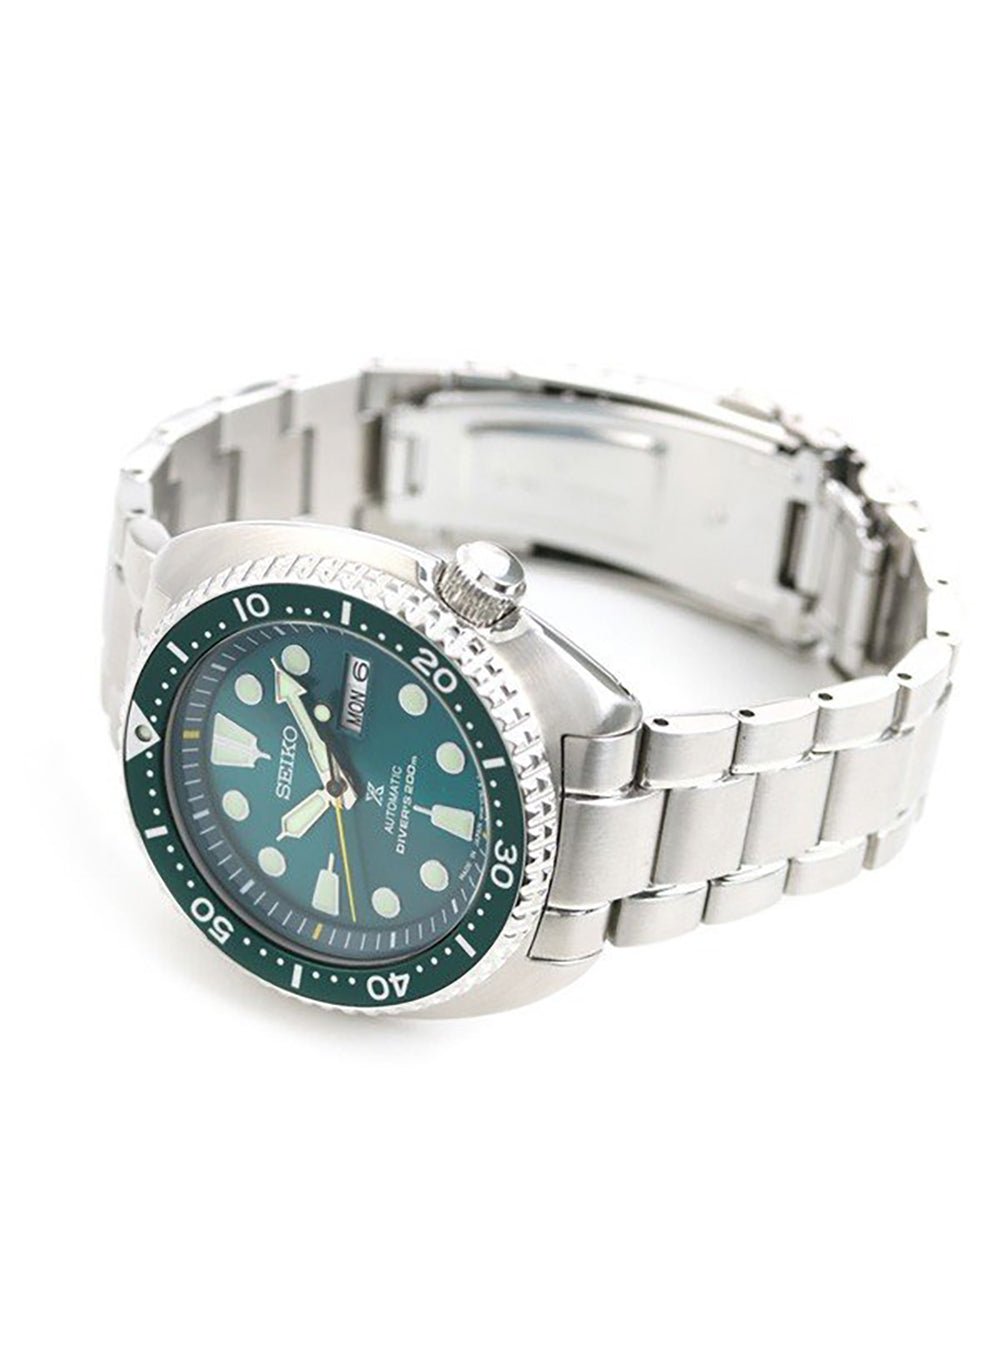 SEIKO PROSPEX TURTLE SBDY039 ONLINE LIMITED MODEL MADE IN JAPAN JDMjapan-select4954628452443WRISTWATCHSEIKO